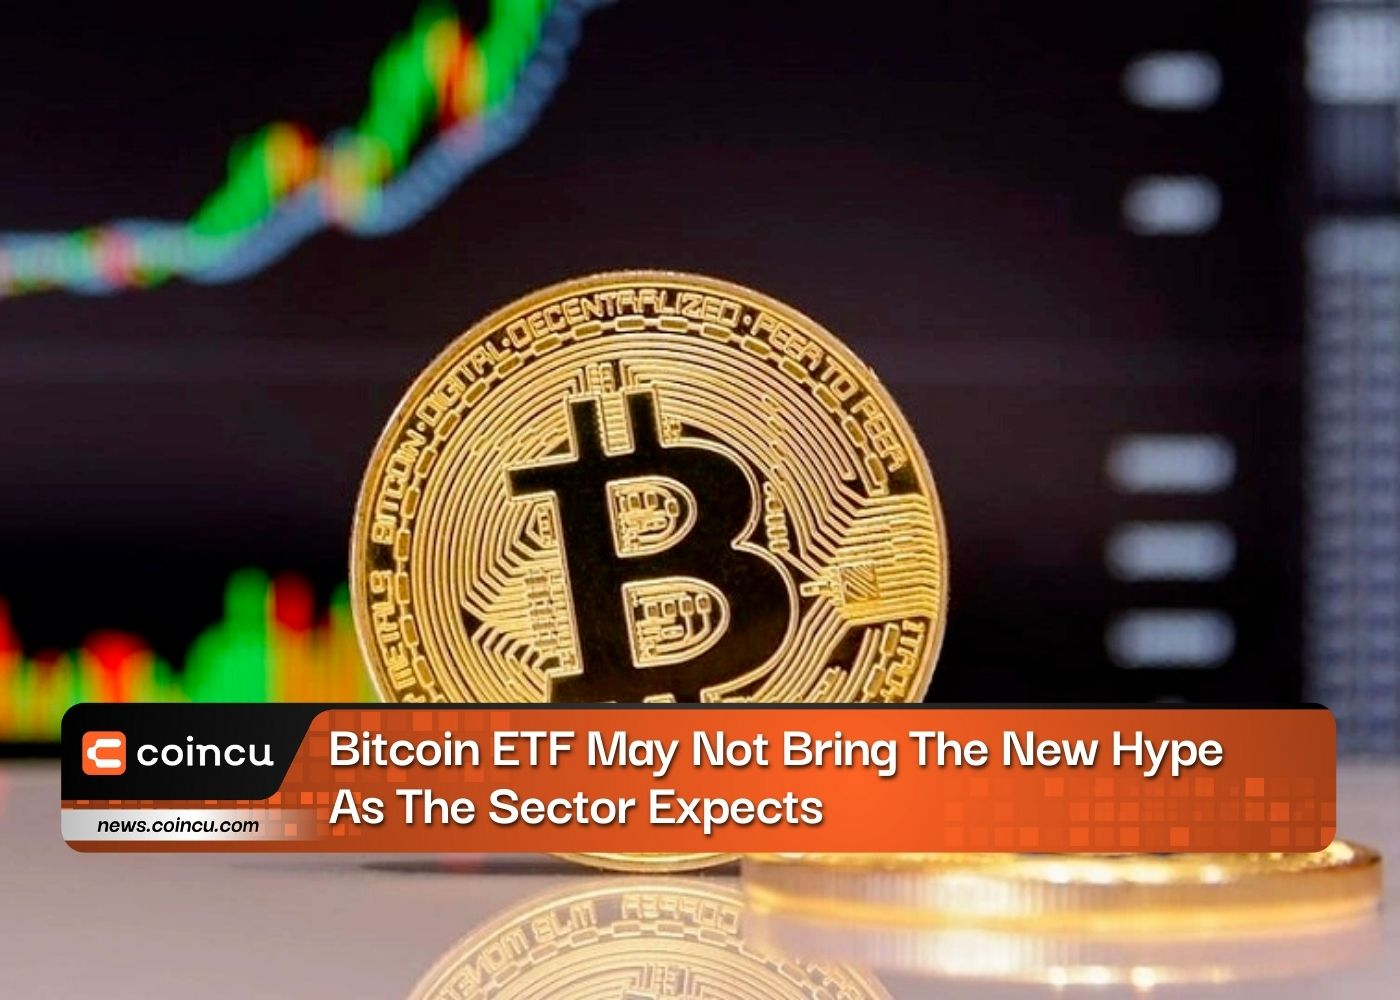 Bitcoin ETF May Not Bring The New Hype As The Sector Expects